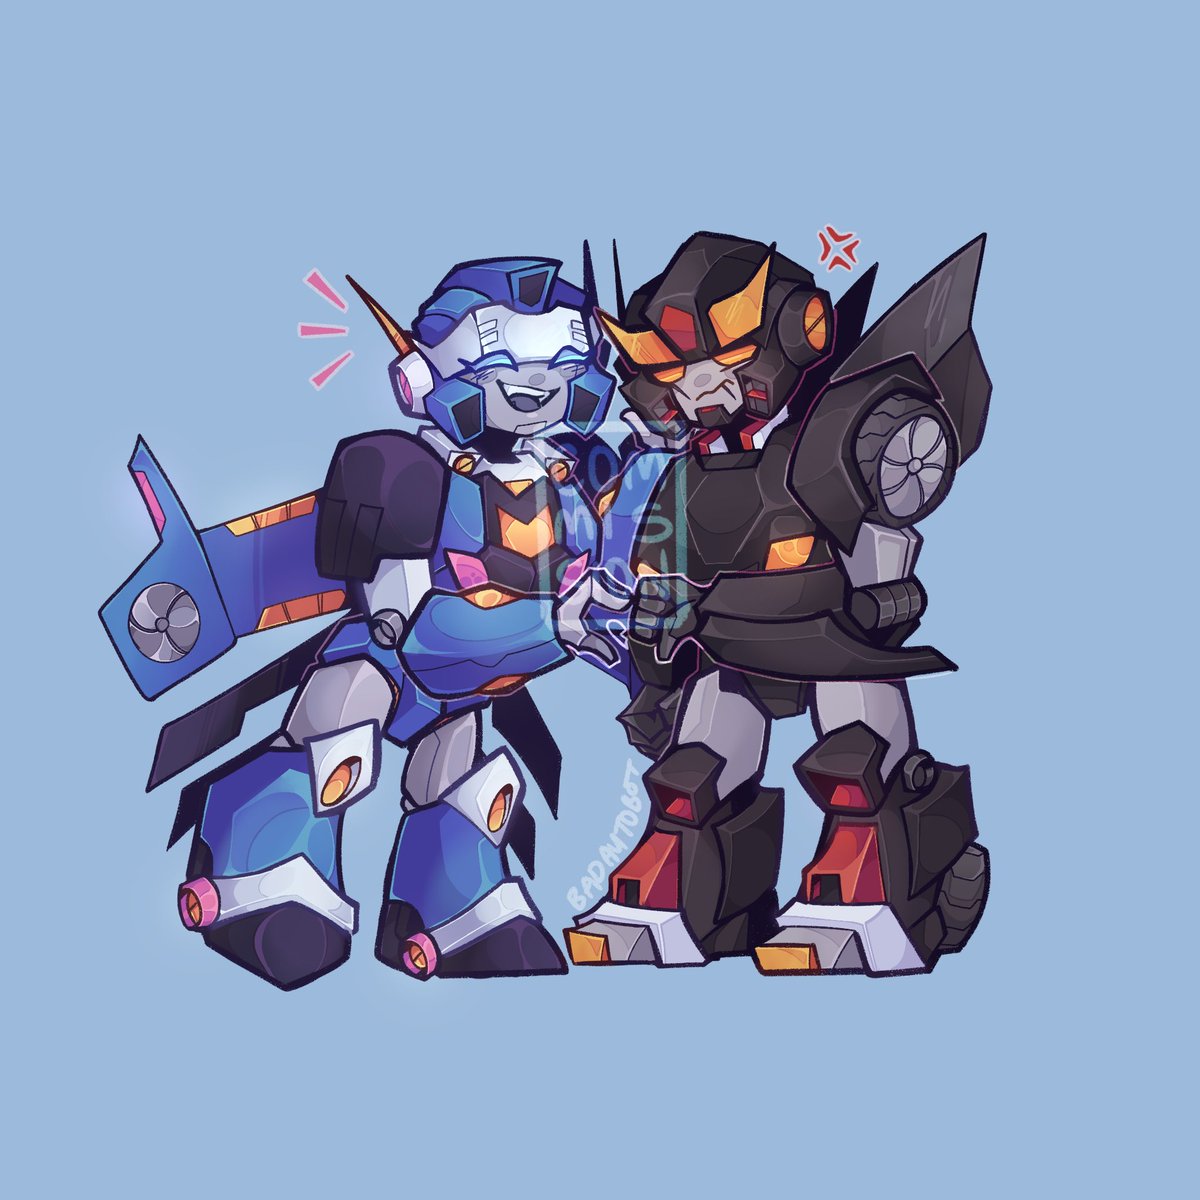 couple of tfoc comms for @astral_stardust ! tysm again :)